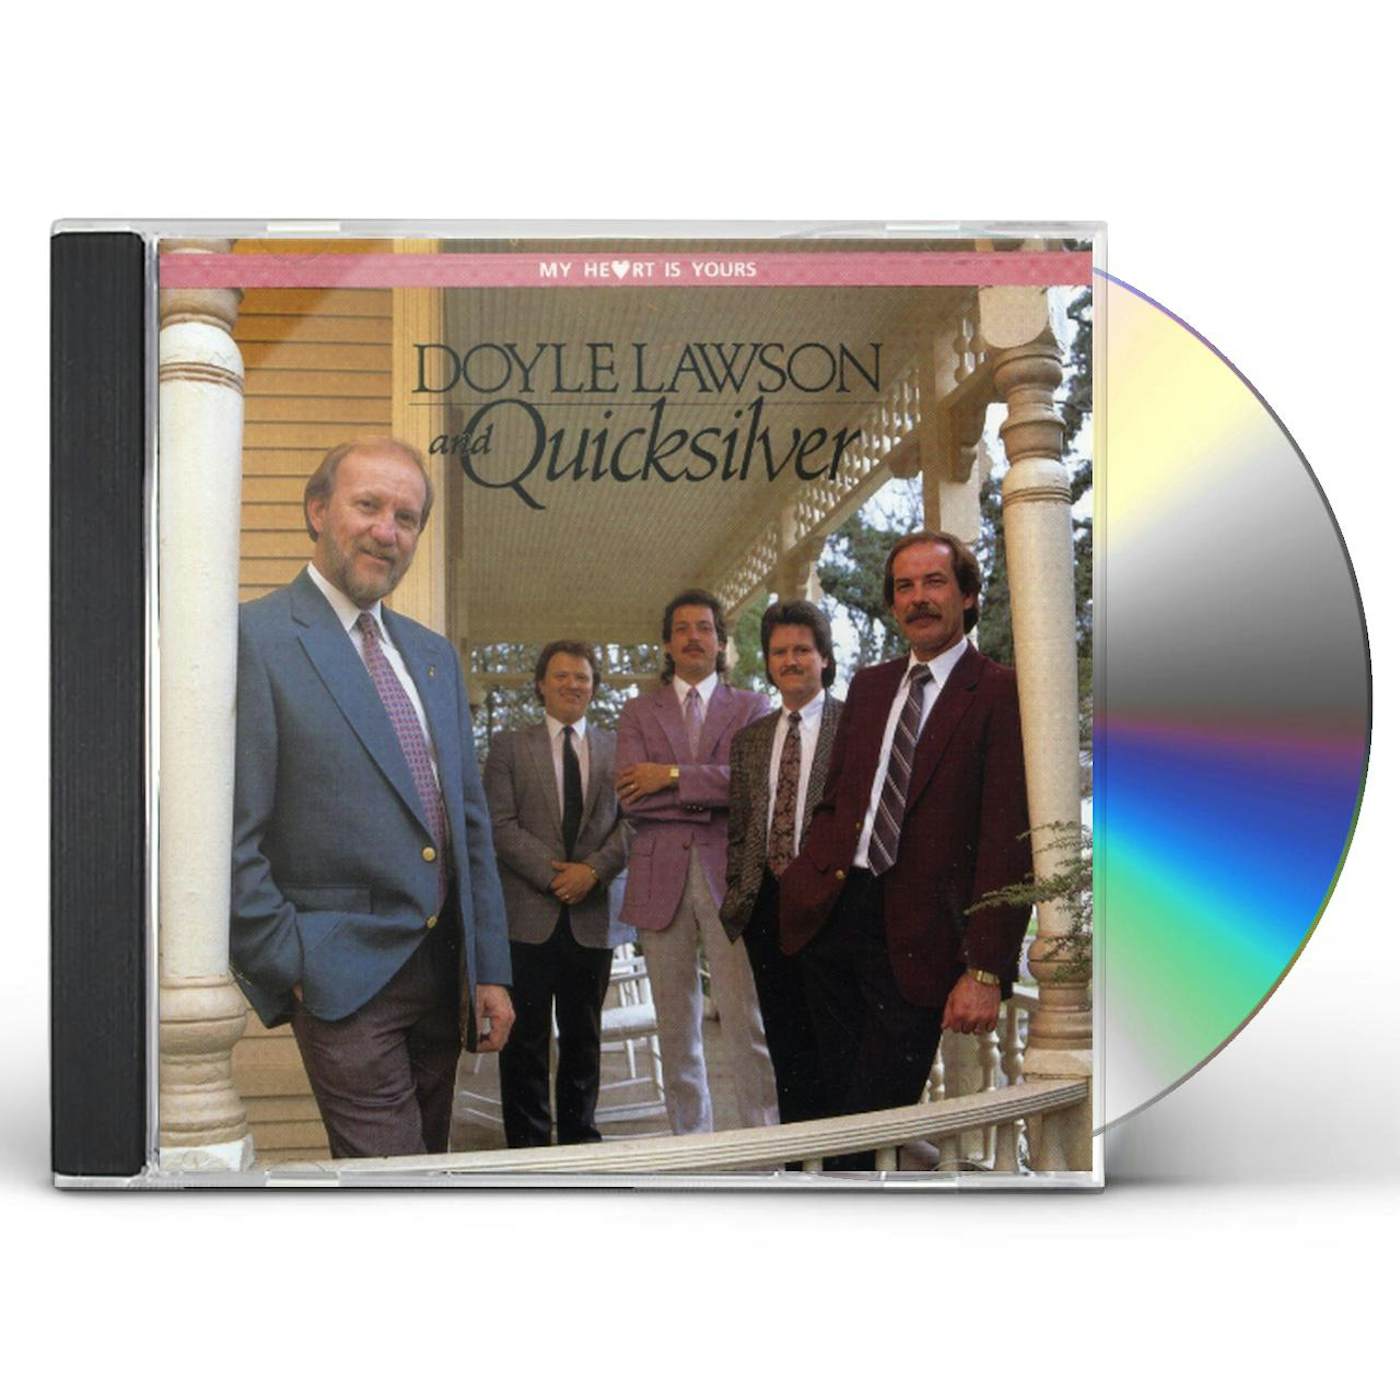 Doyle Lawson & Quicksilver MY HEART IS YOURS CD